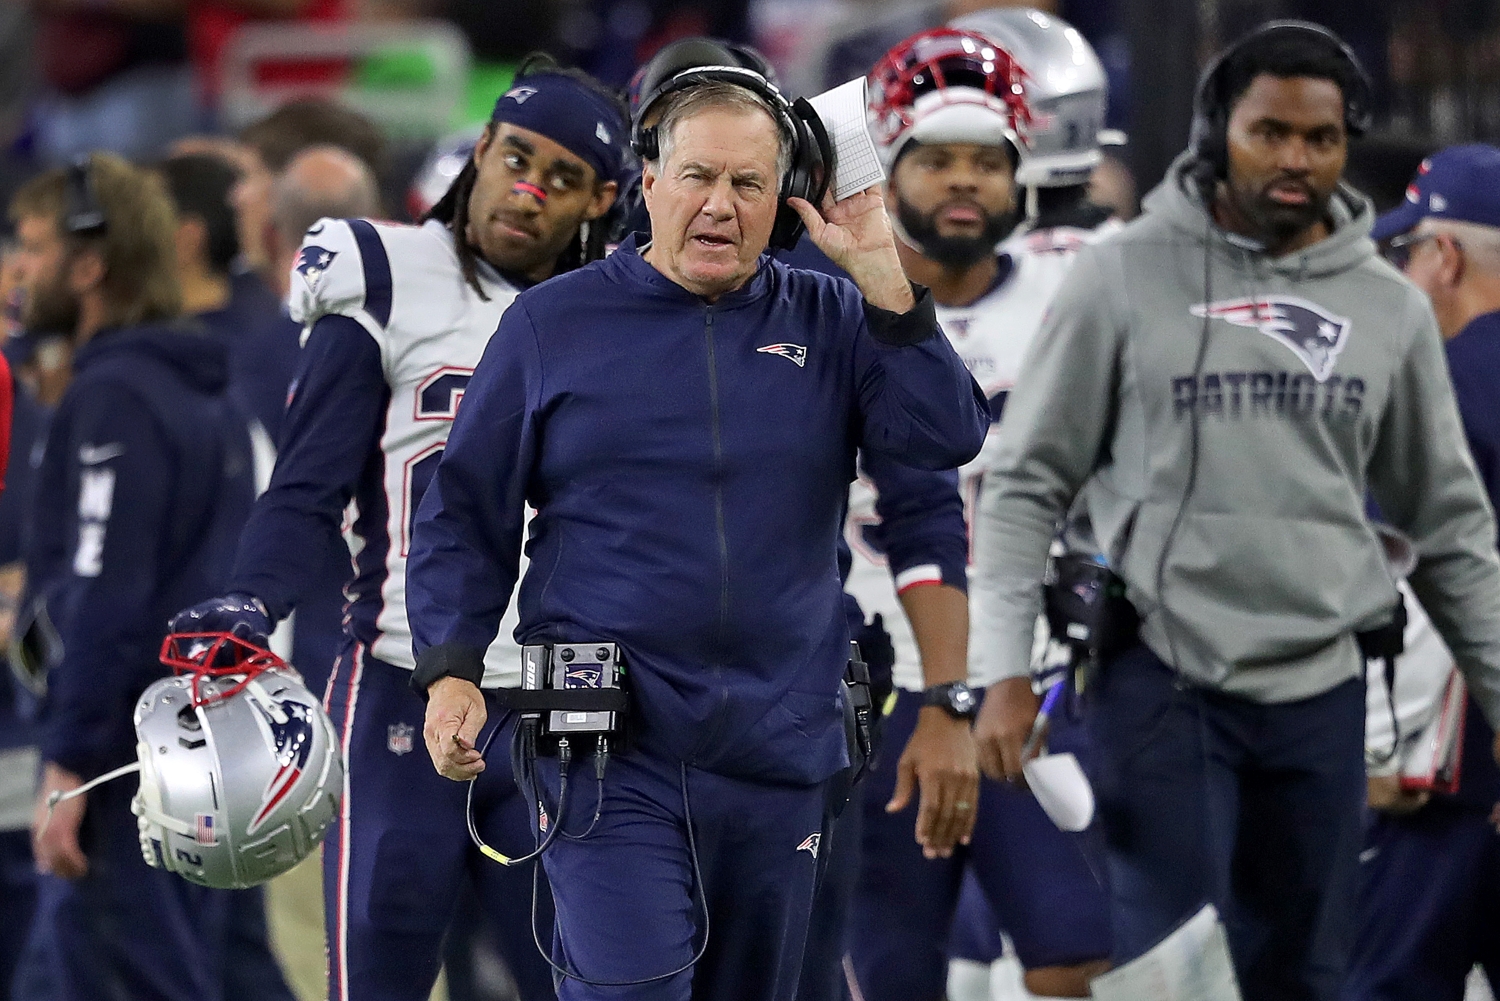 Patriots head coach Bill Belichick walks the sideline as Stephon Gilmore follows behind.